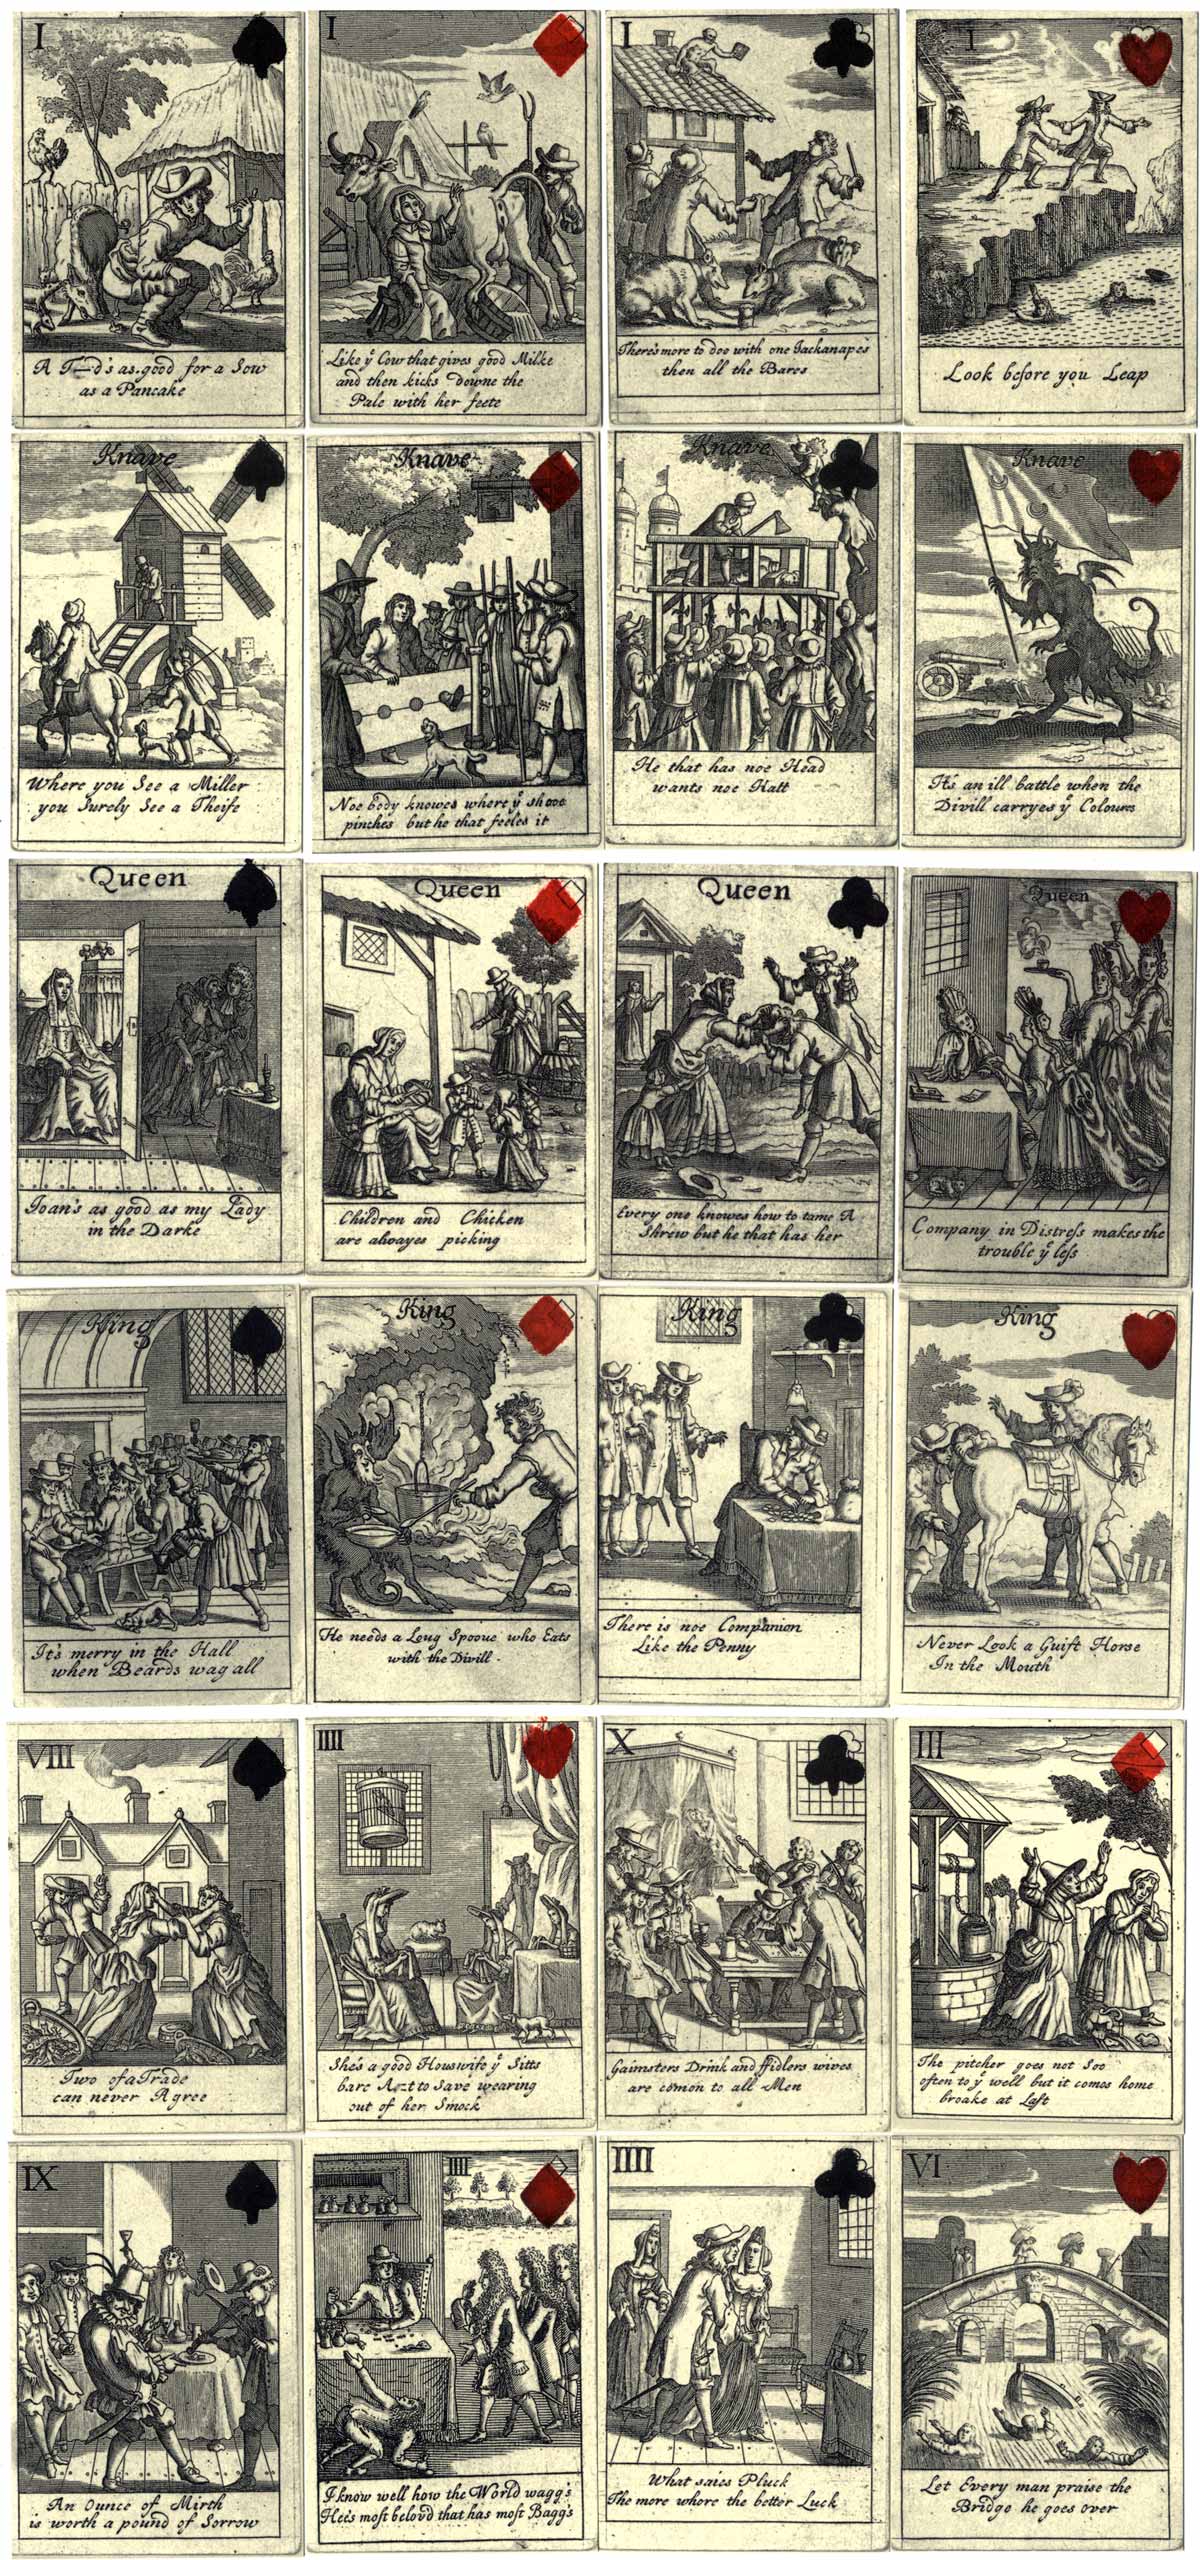 William Warter's Proverbial Cards, first published in 1698